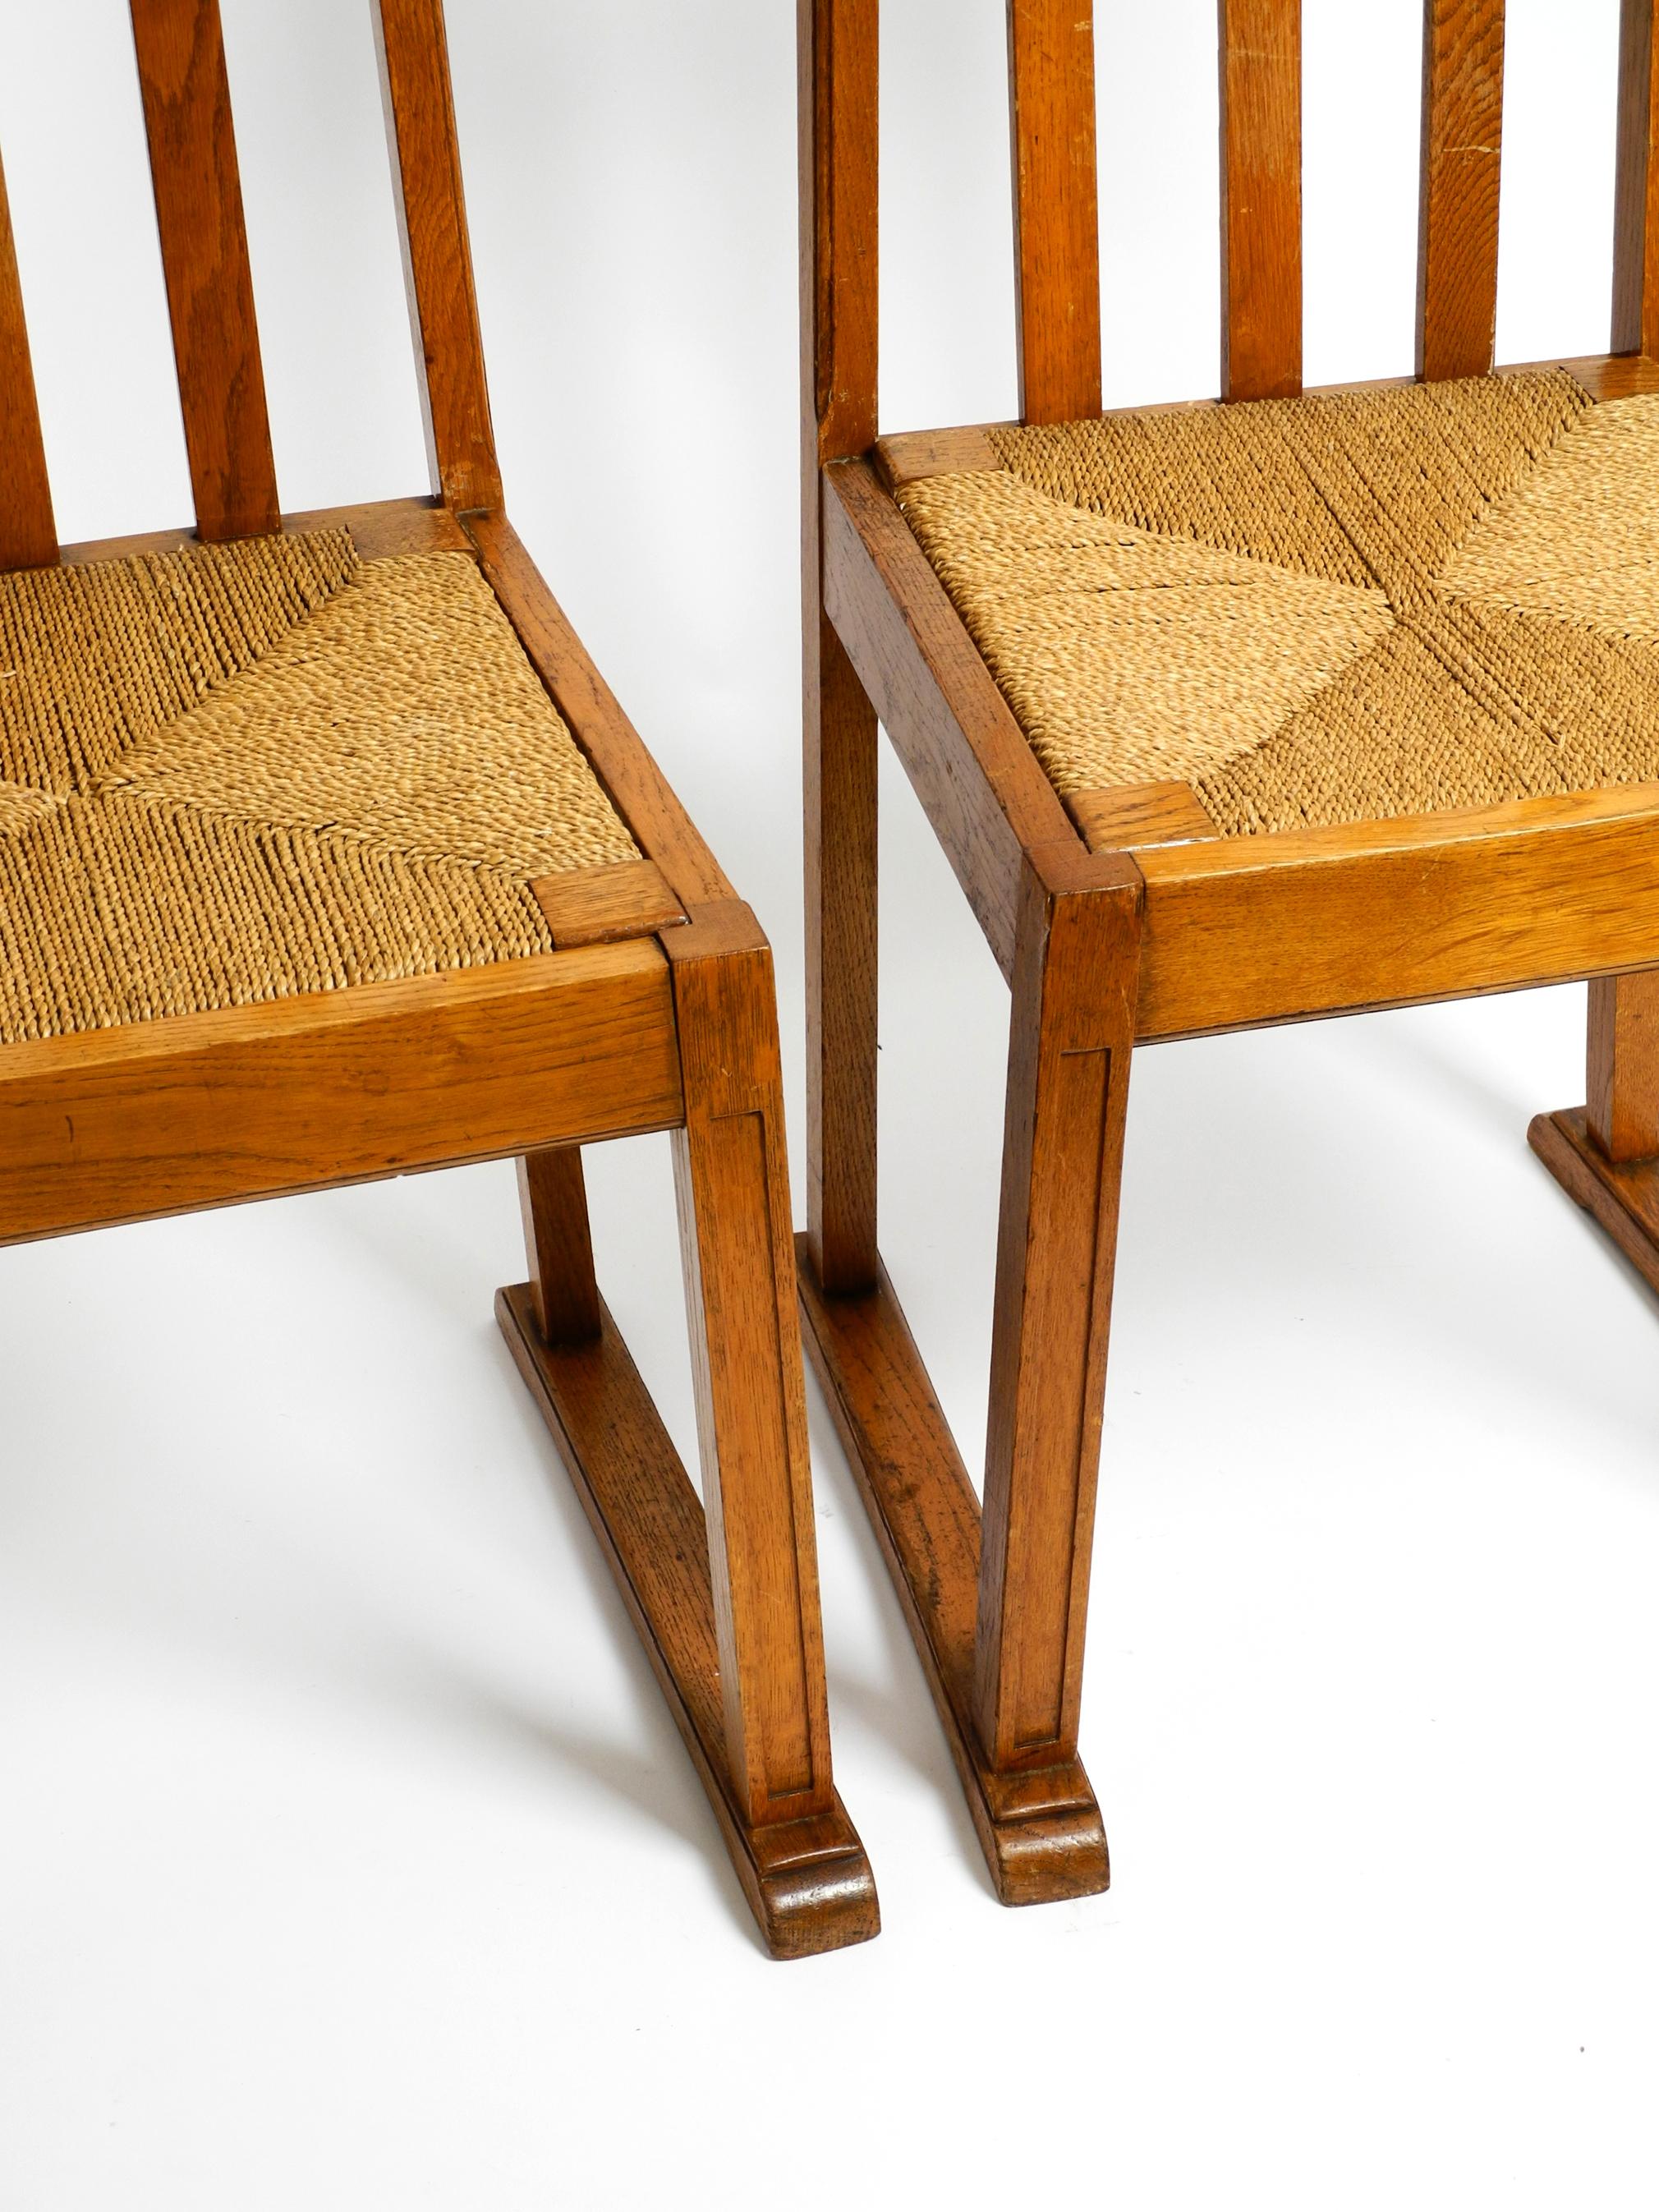 Pair of Beautiful Rare Mid Century Oak Chairs with Skid Feet and Wicker Seats For Sale 3